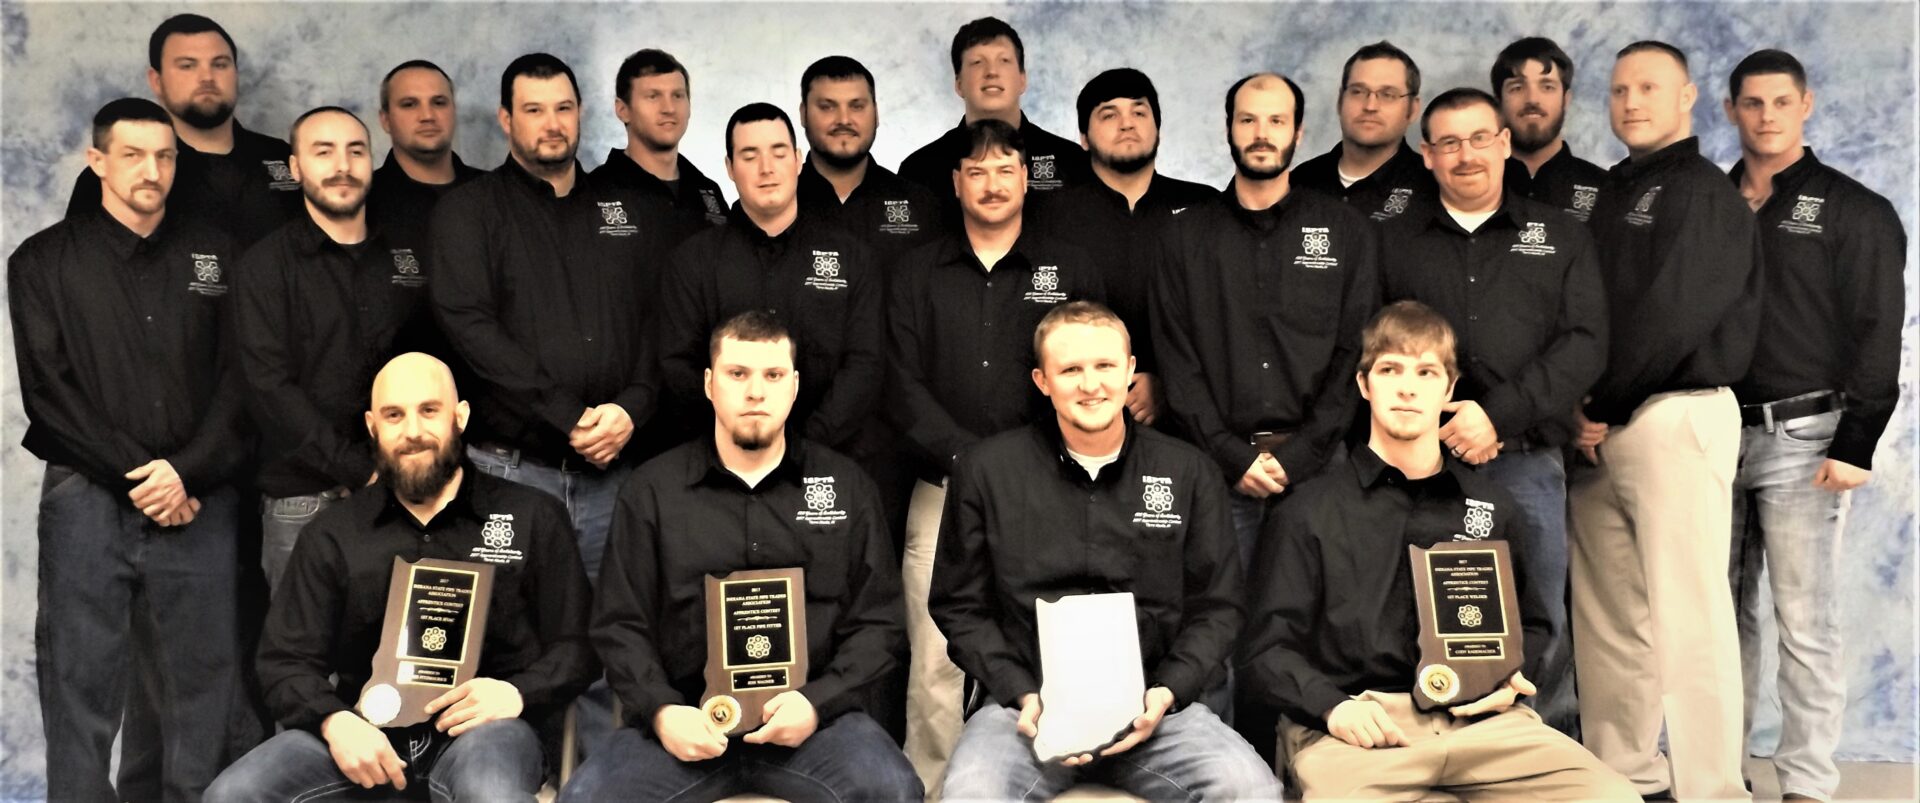 Indiana State Pipe Trades Association